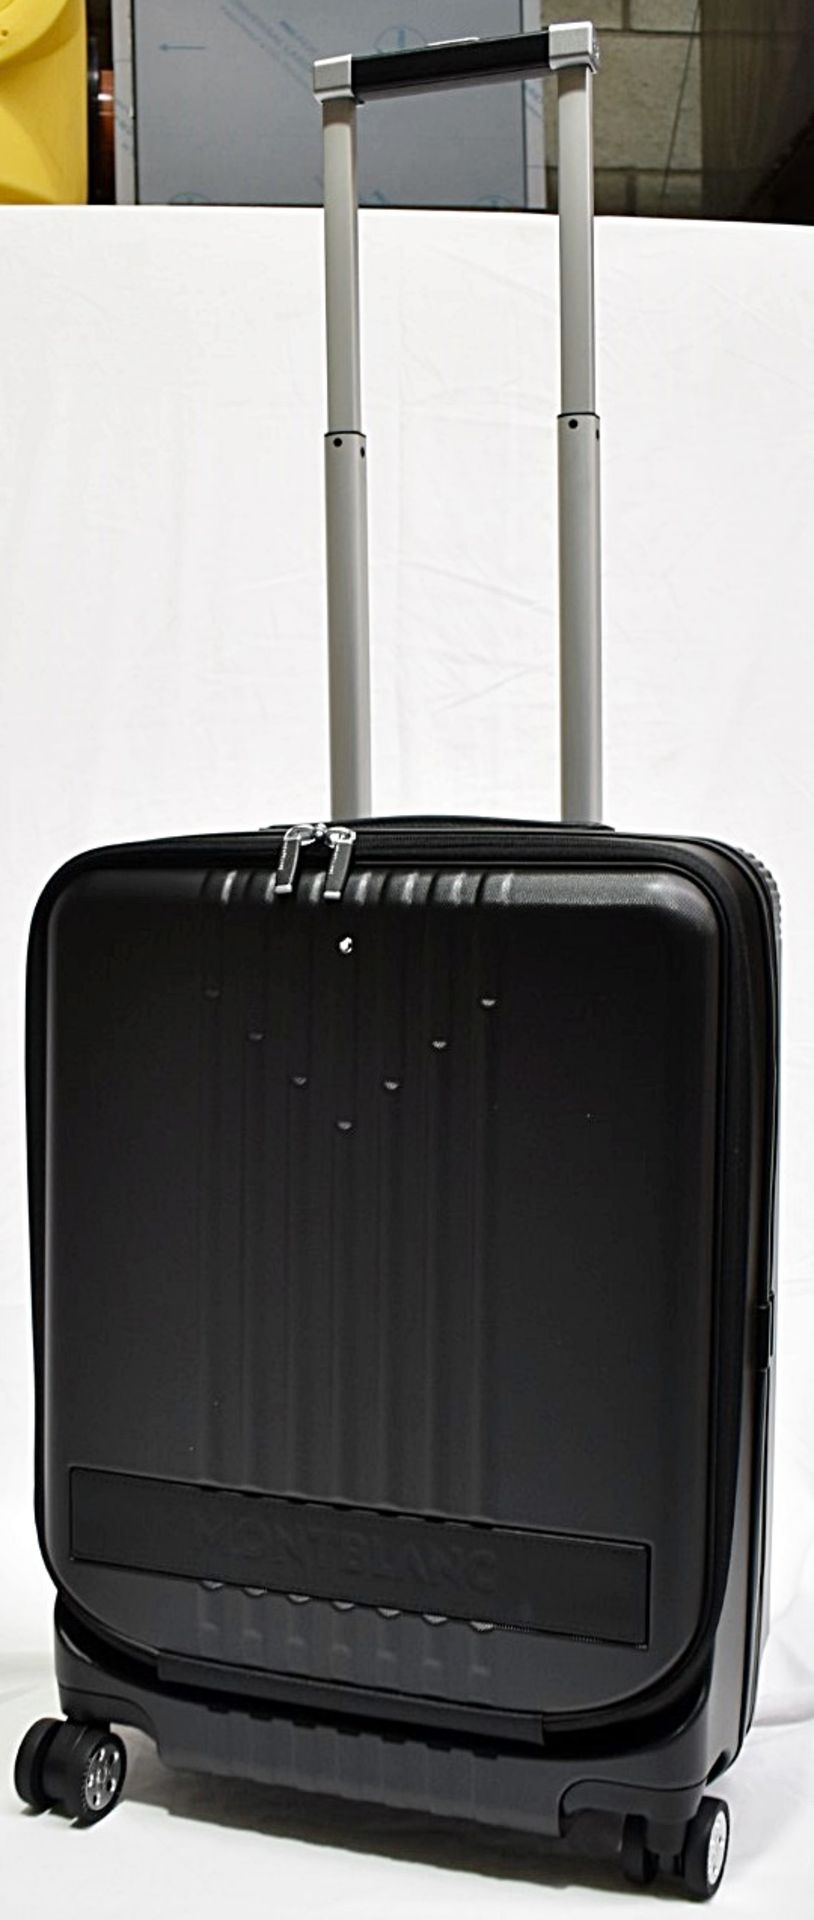 1 x MONTBLANC Polycarbonite Hand Luggage Cabin Trolley (55cm) - Original RRP £690.00 - Image 5 of 26